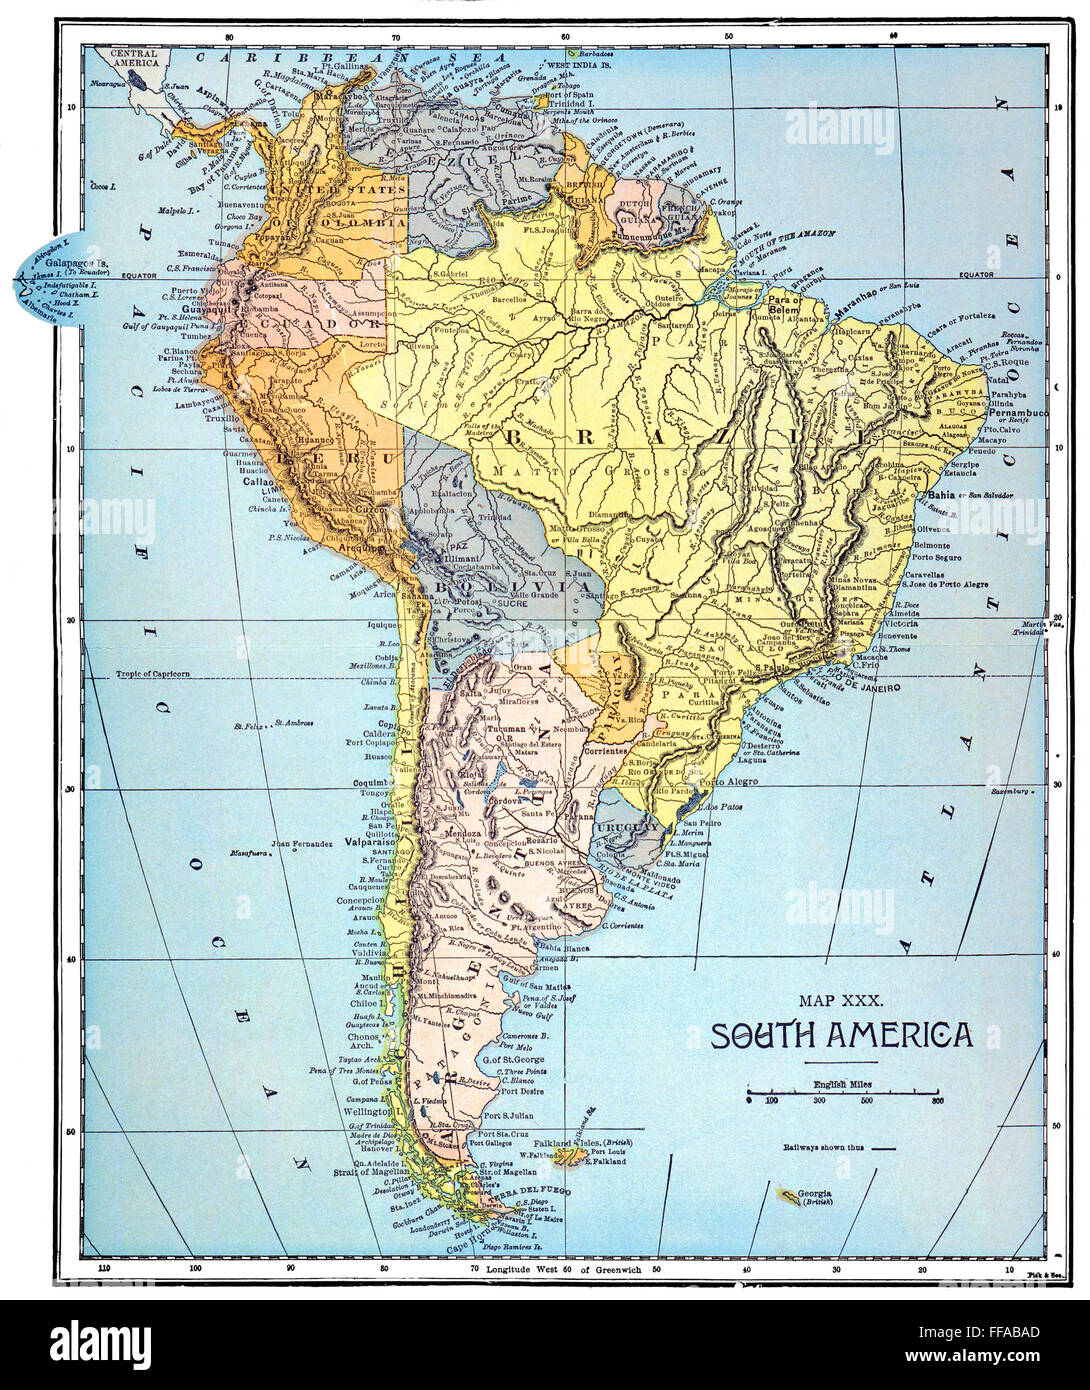 SOUTH AMERICA: MAP, c1890. /nPublished in the United States. Stock Photo